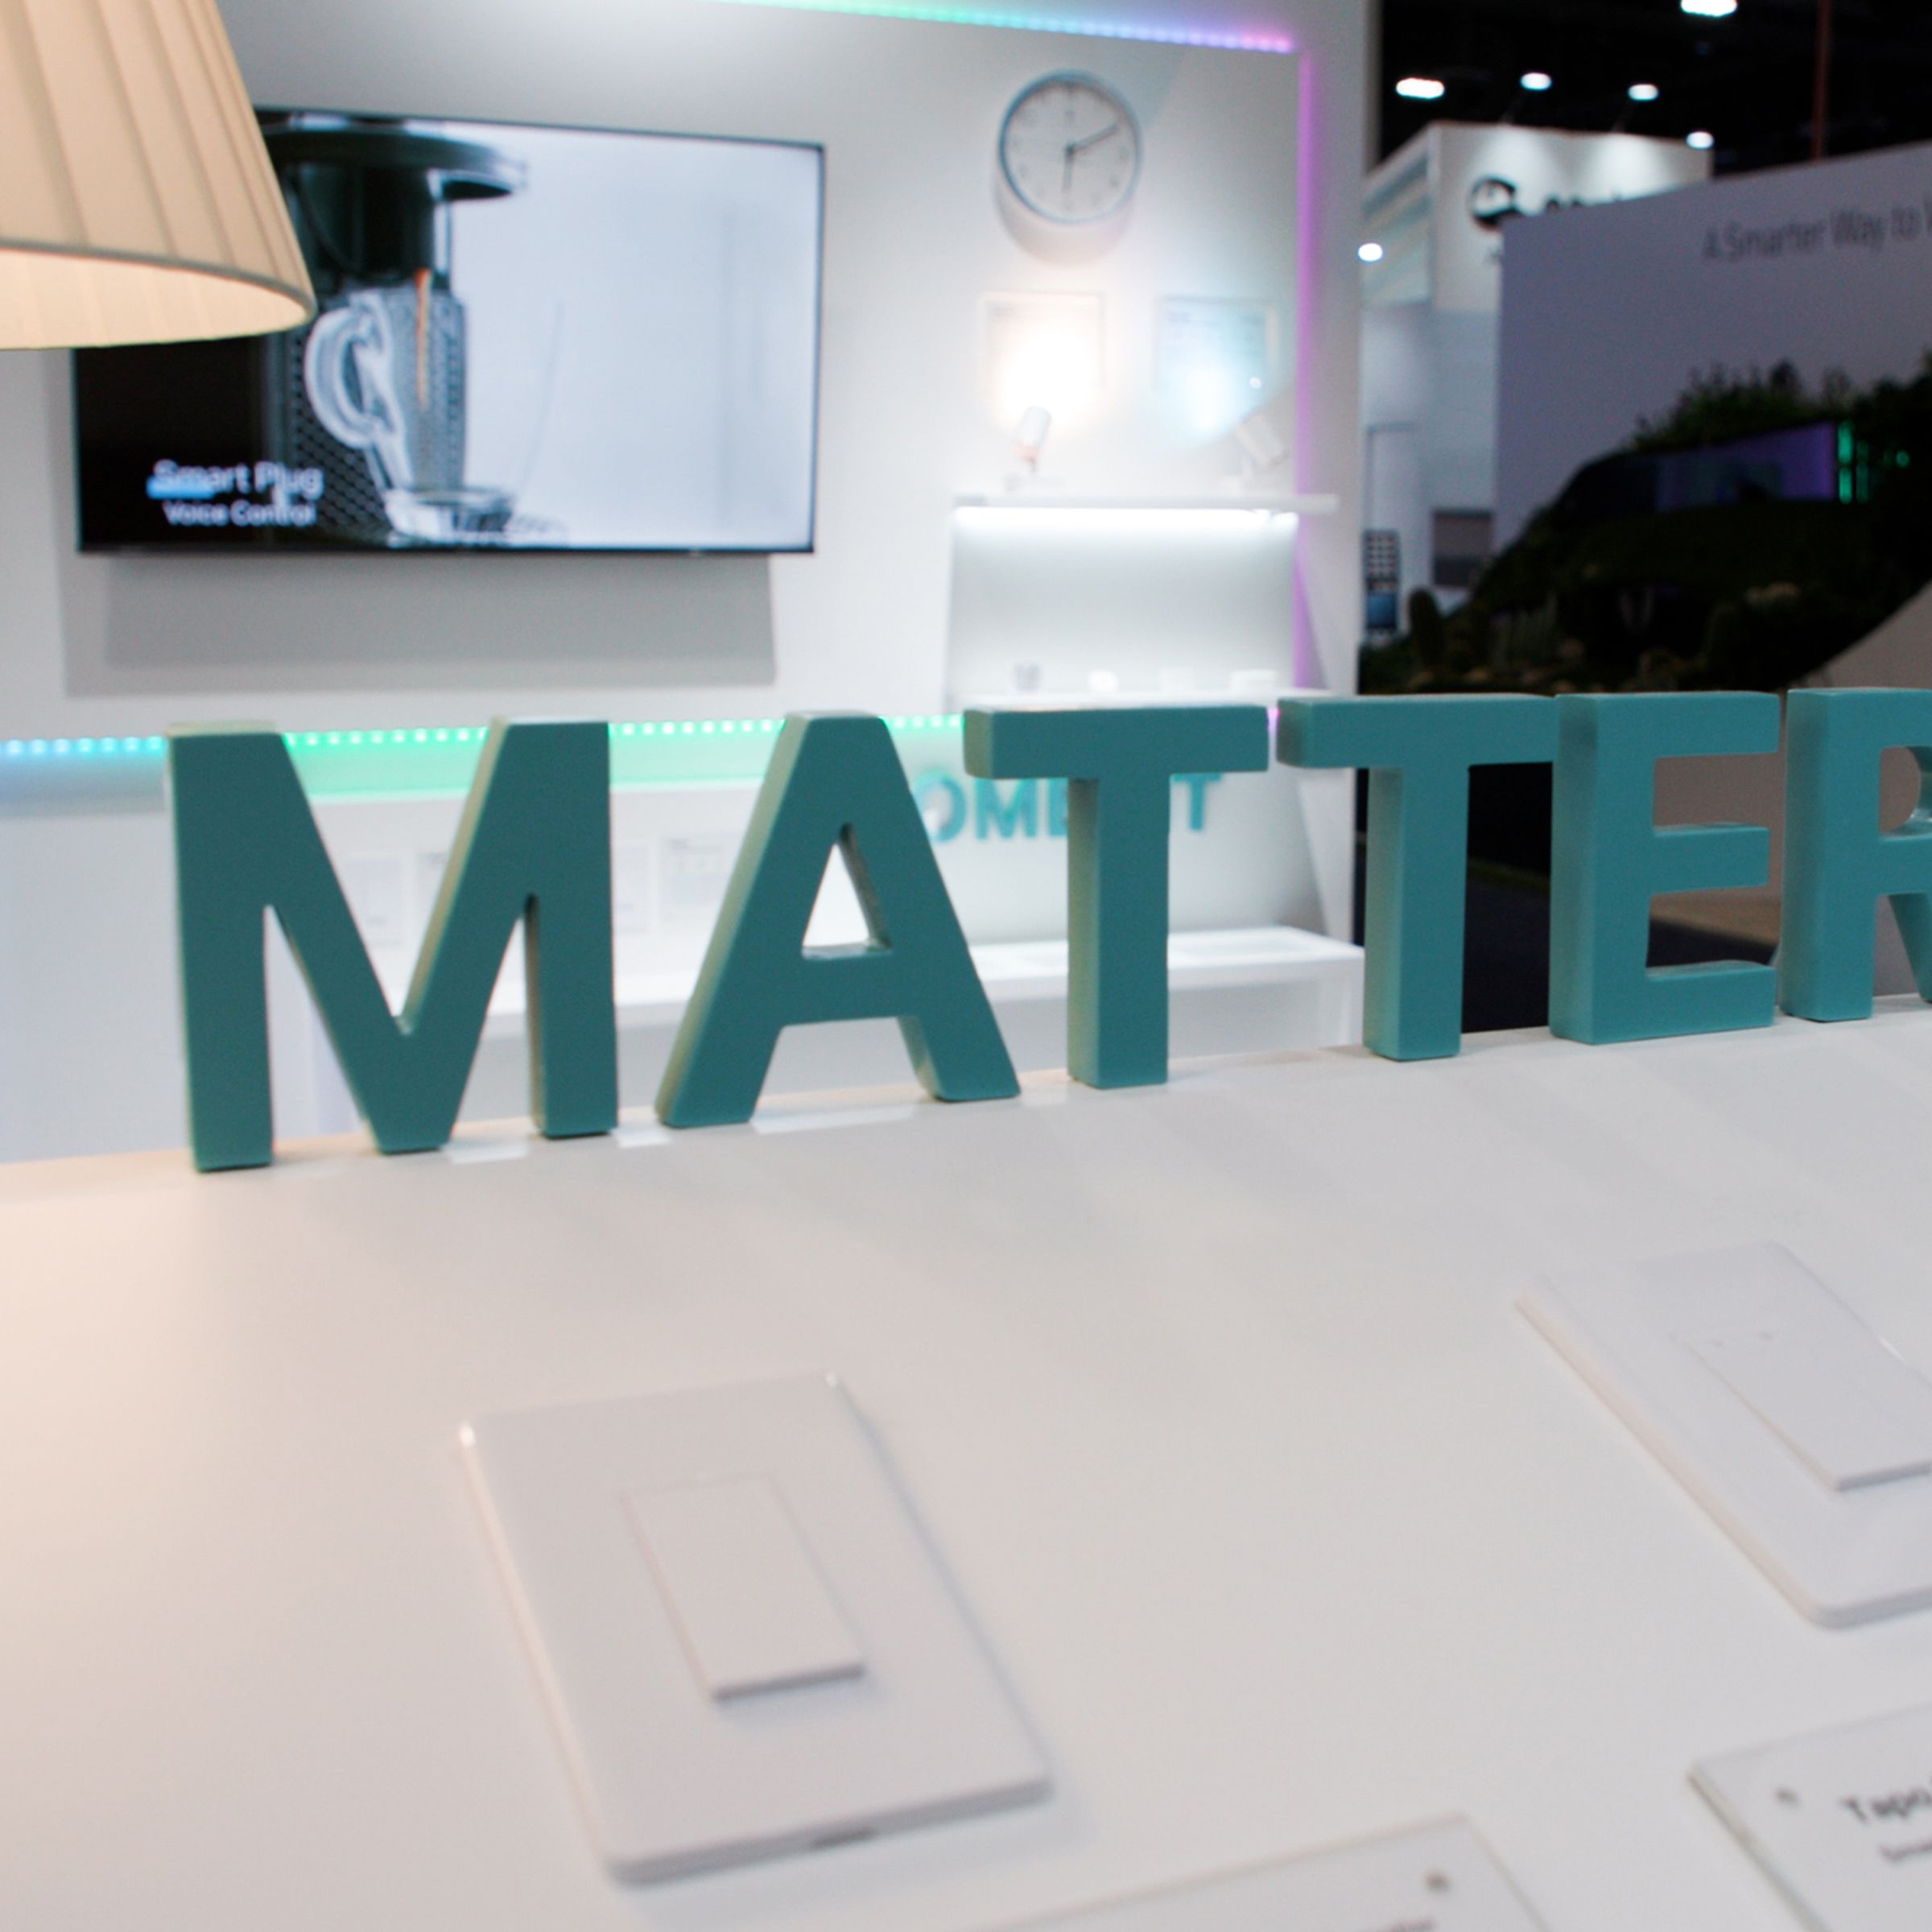 A green Matter sign above smart switches in a booth on the trade show floor.